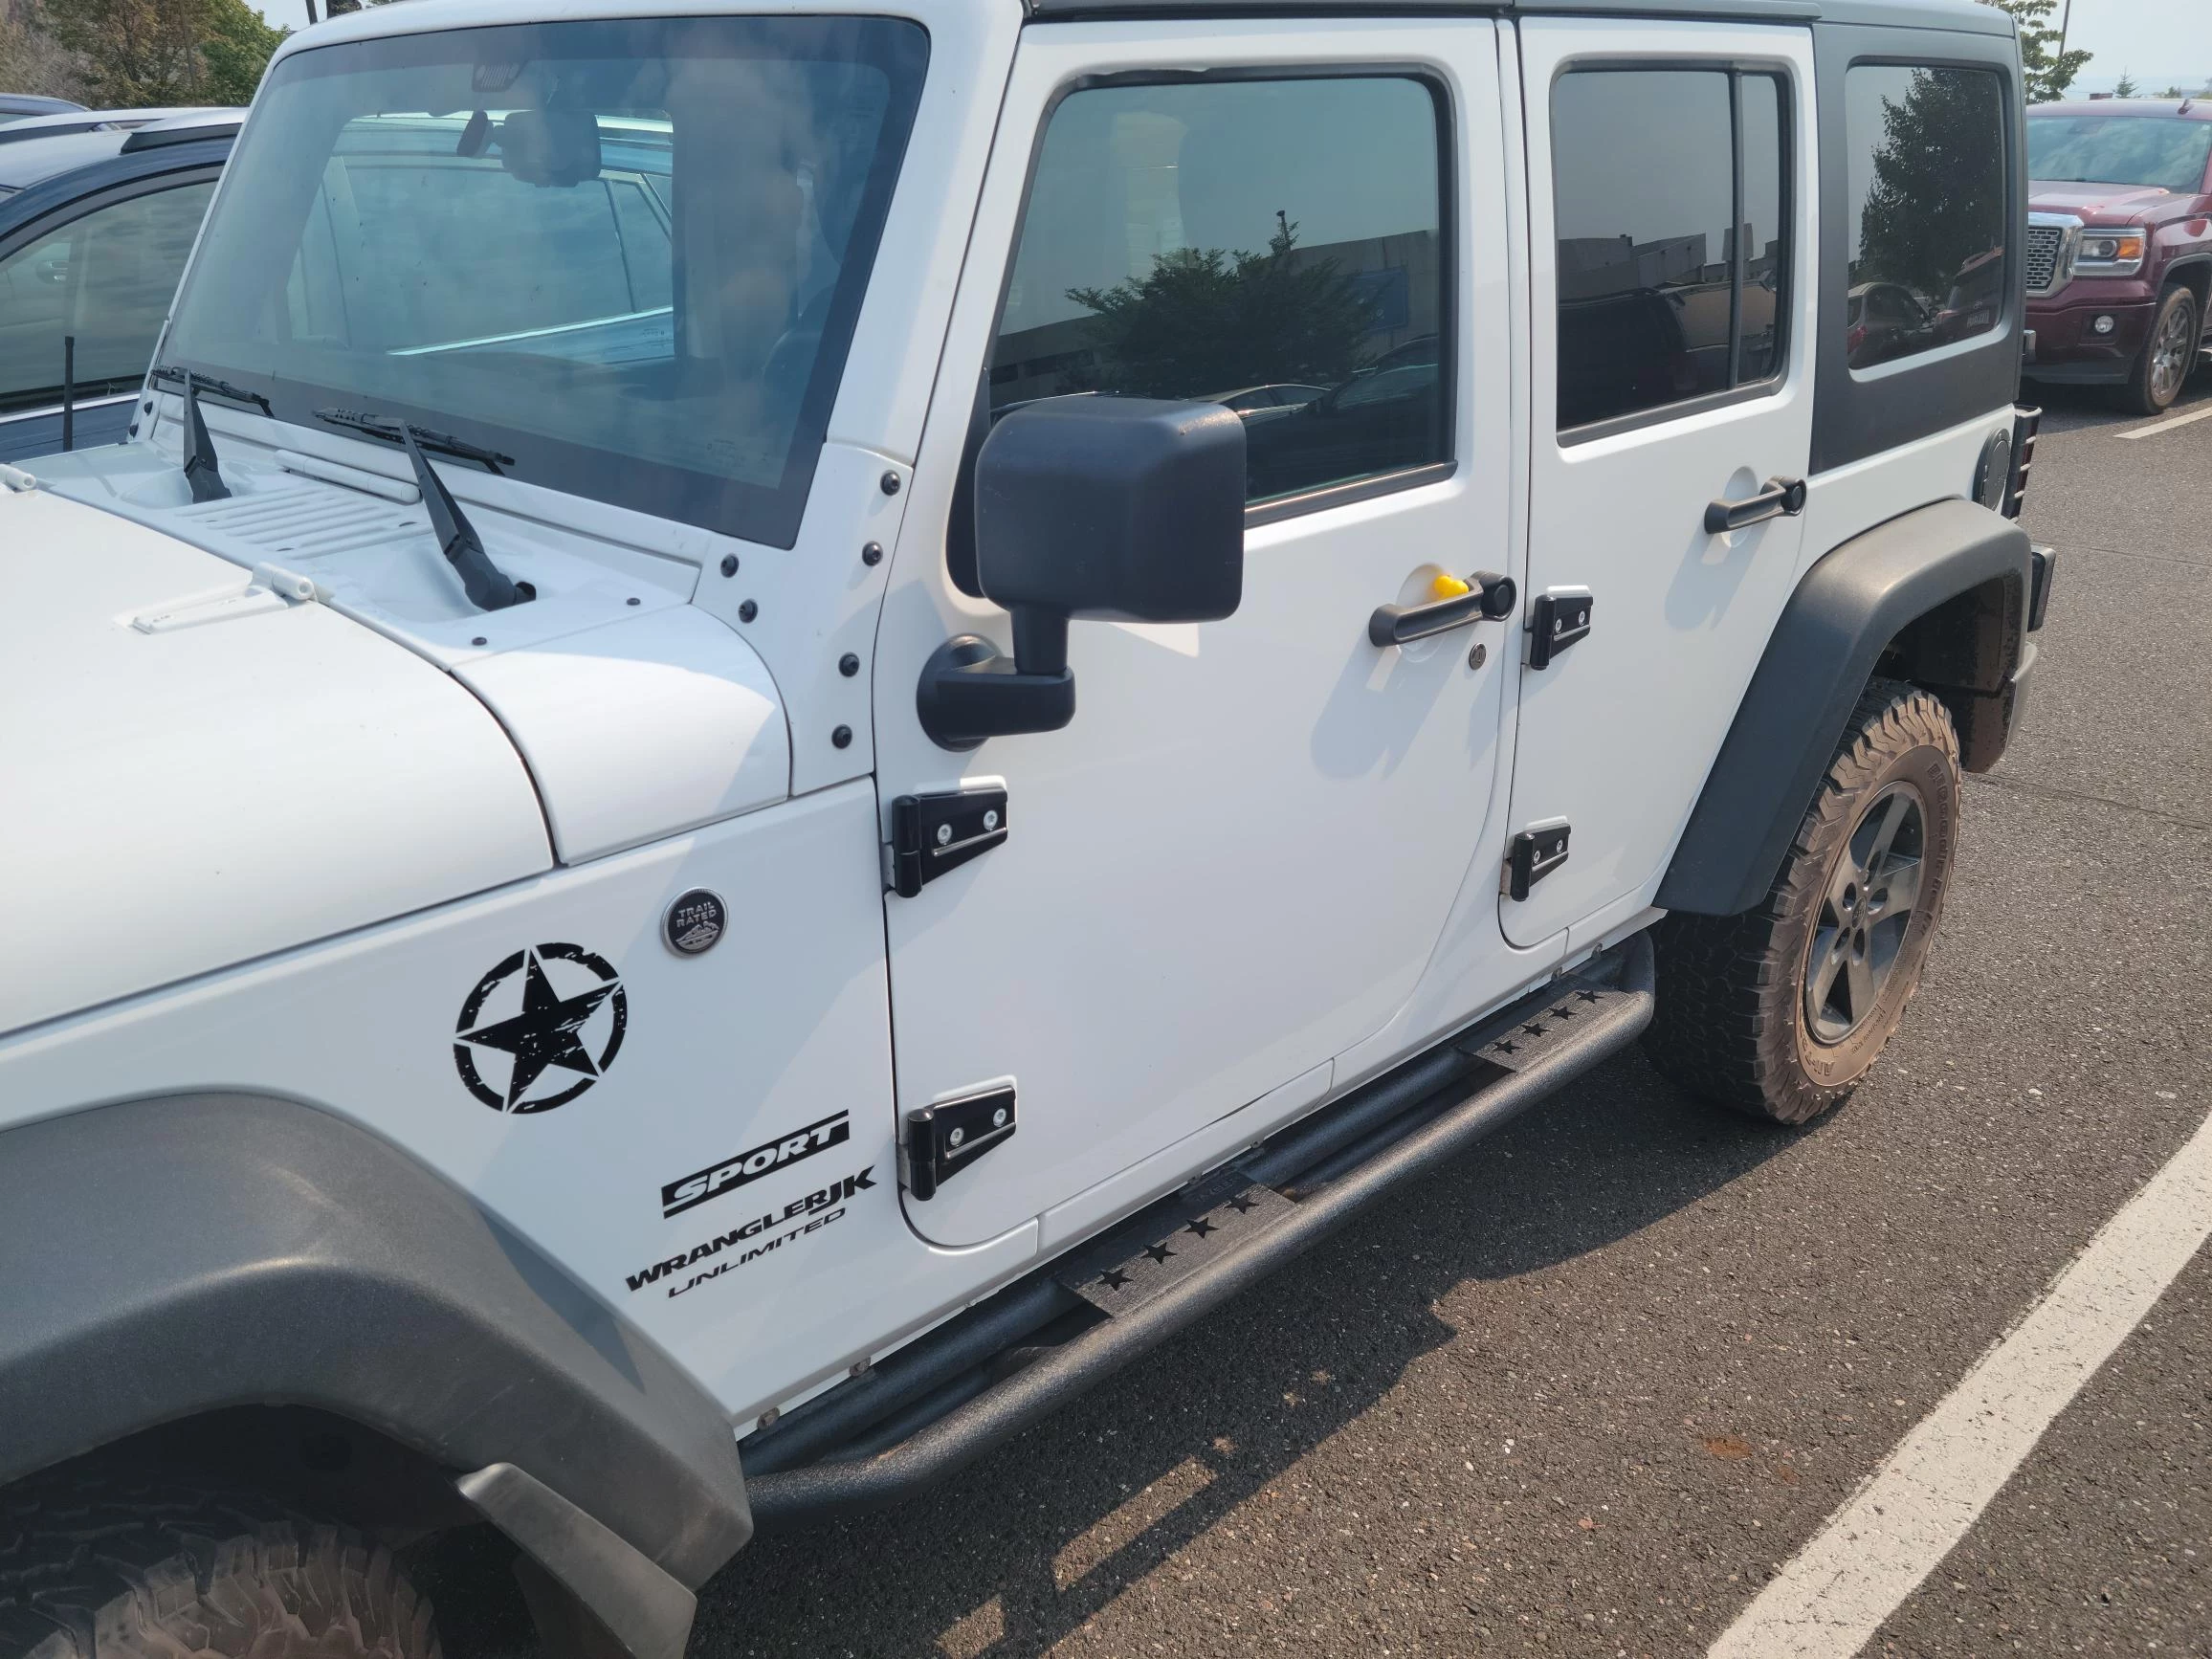 What's With People Leaving Rubber Ducks On Jeeps?